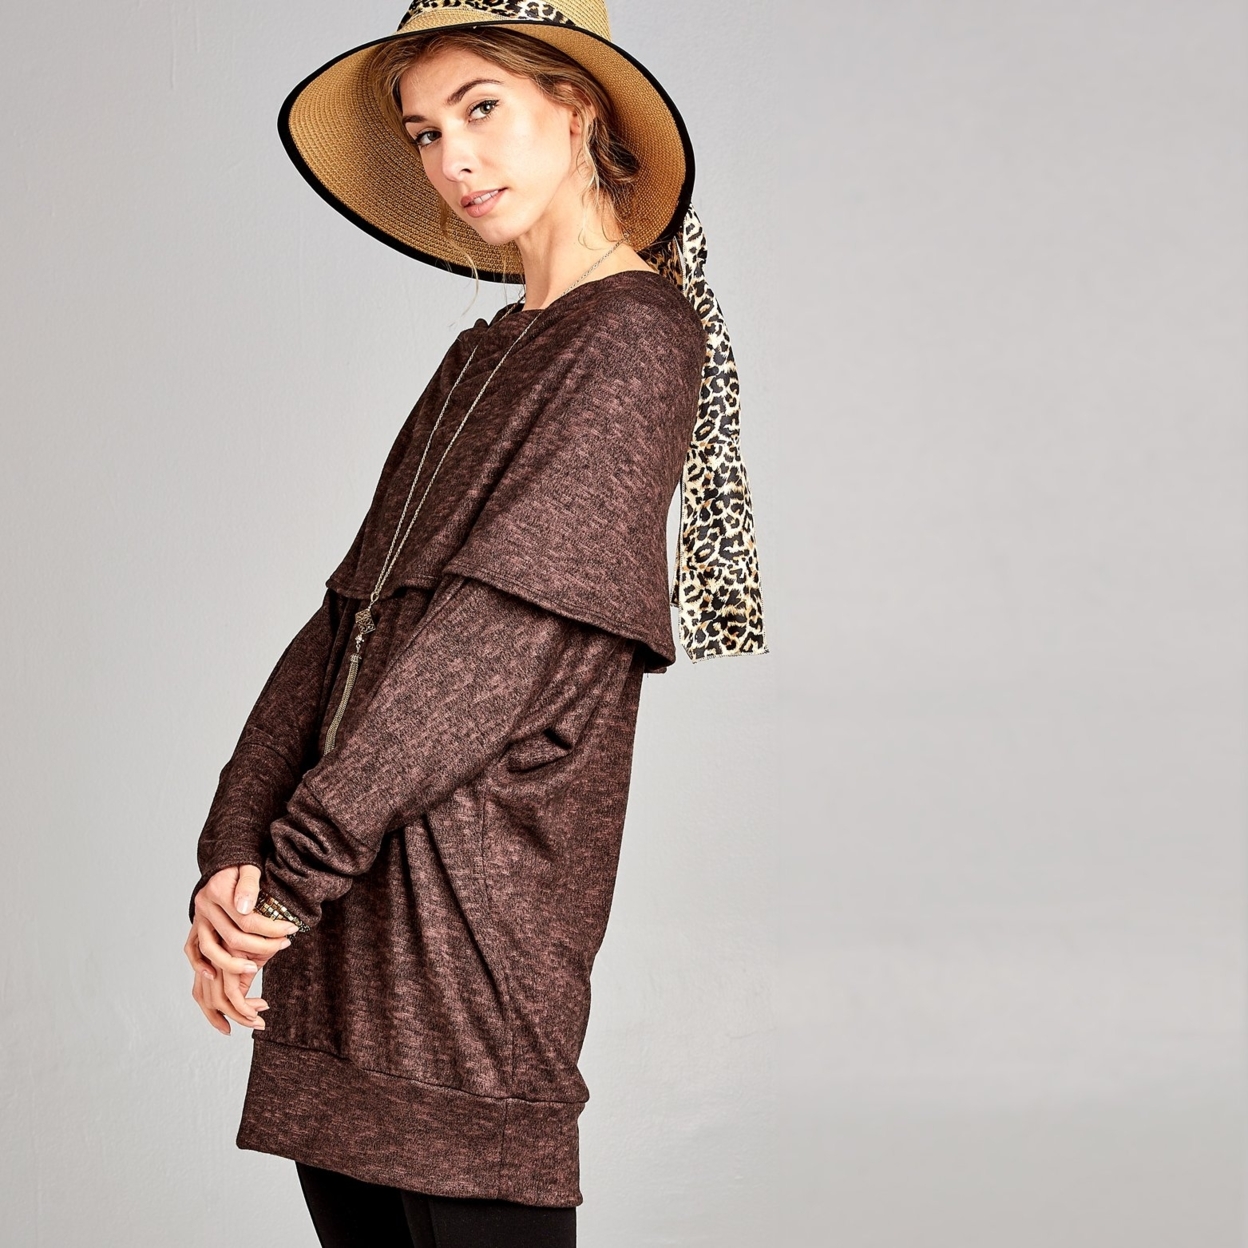 Oversized Cowl Neck Marled Sweater - Brown, Small (2-6)